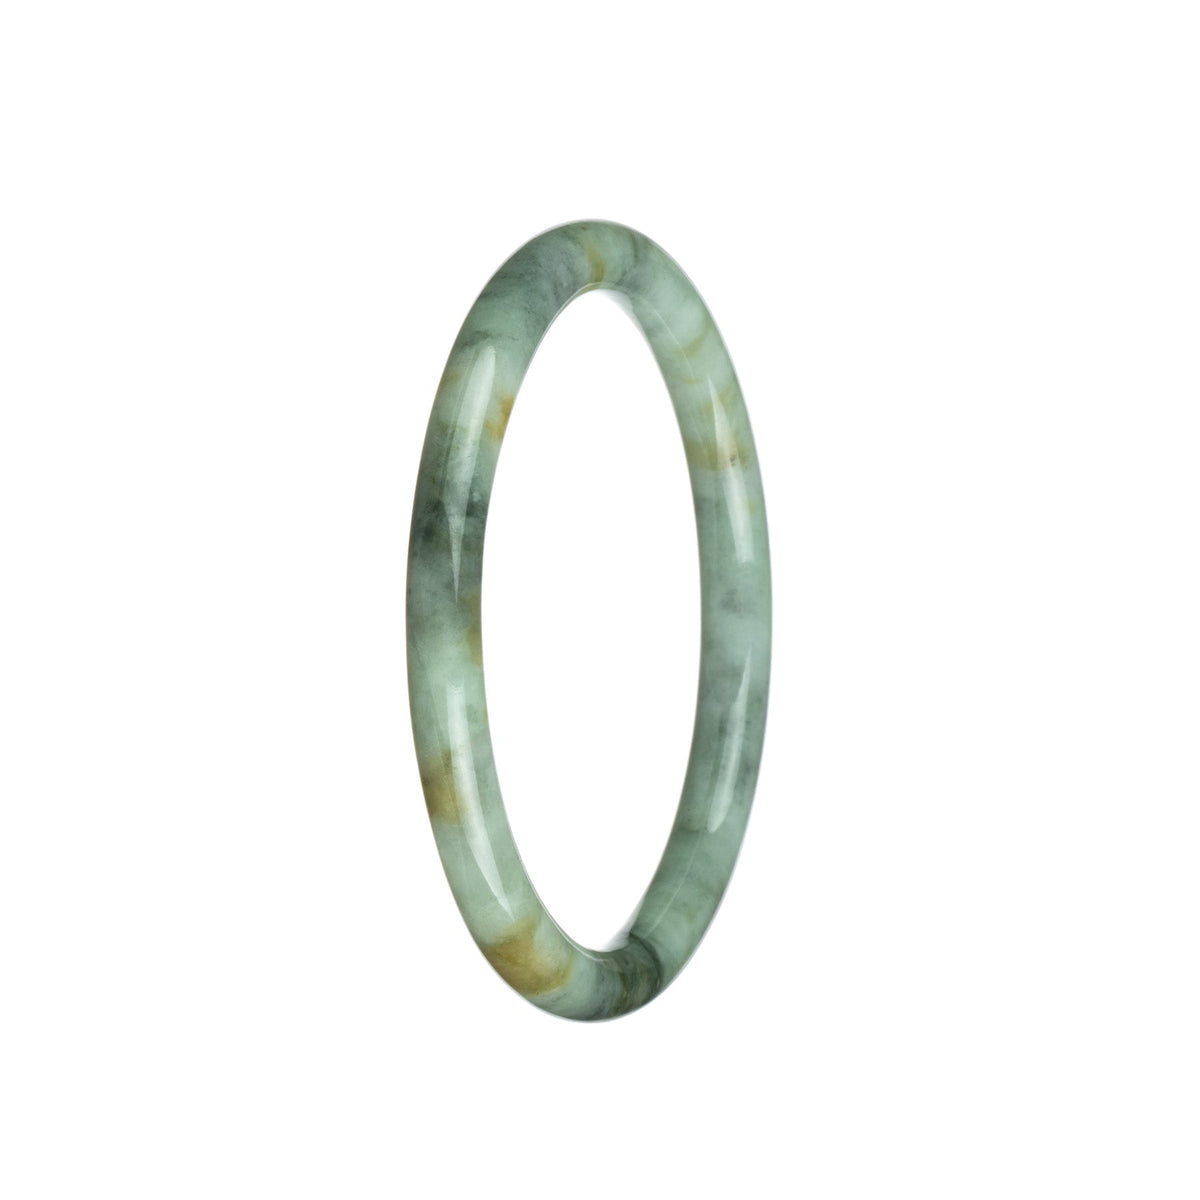 A close-up image of a petite round jade bangle bracelet with a greyish white and grey pattern. The bracelet is made of genuine Type A jade.